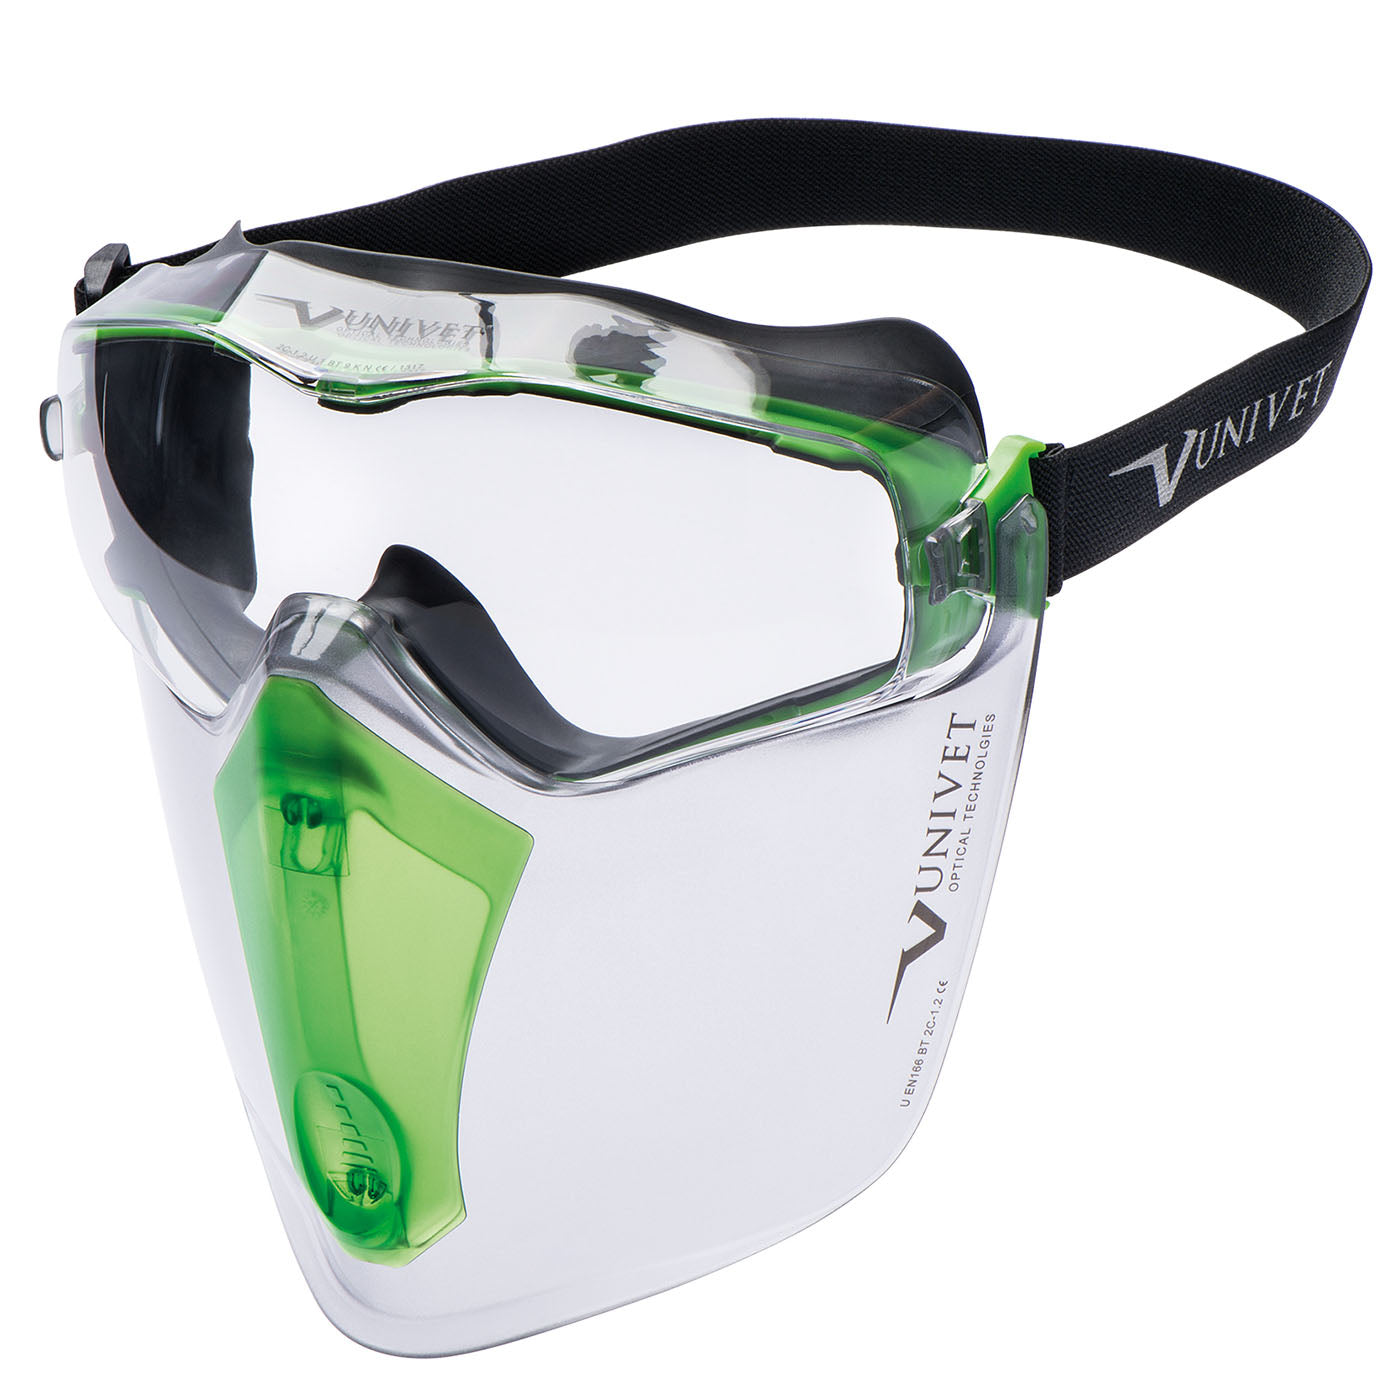 Univet 6X3 safety goggles assembly